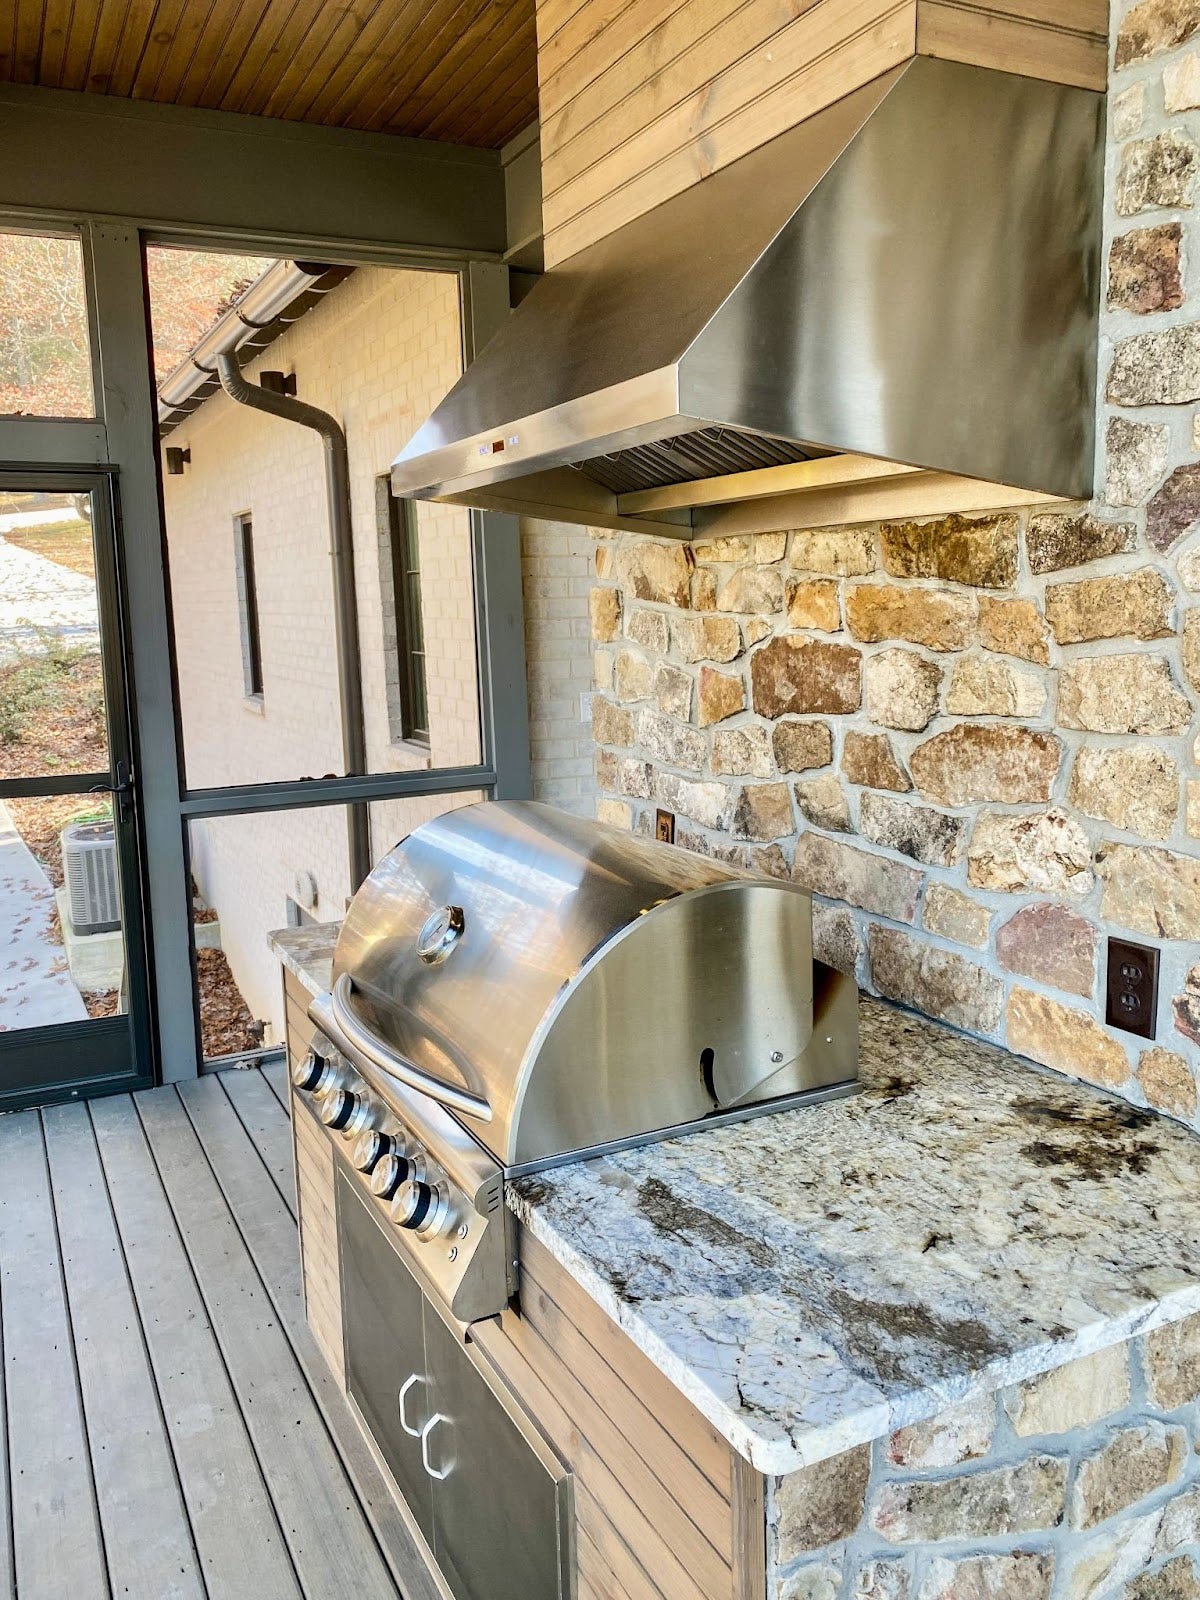 Outdoor patio kitchen equipped with a durable Proline range hood above a grill, beautifully integrated into a stone wall with natural textures - prolinerangehoods.com